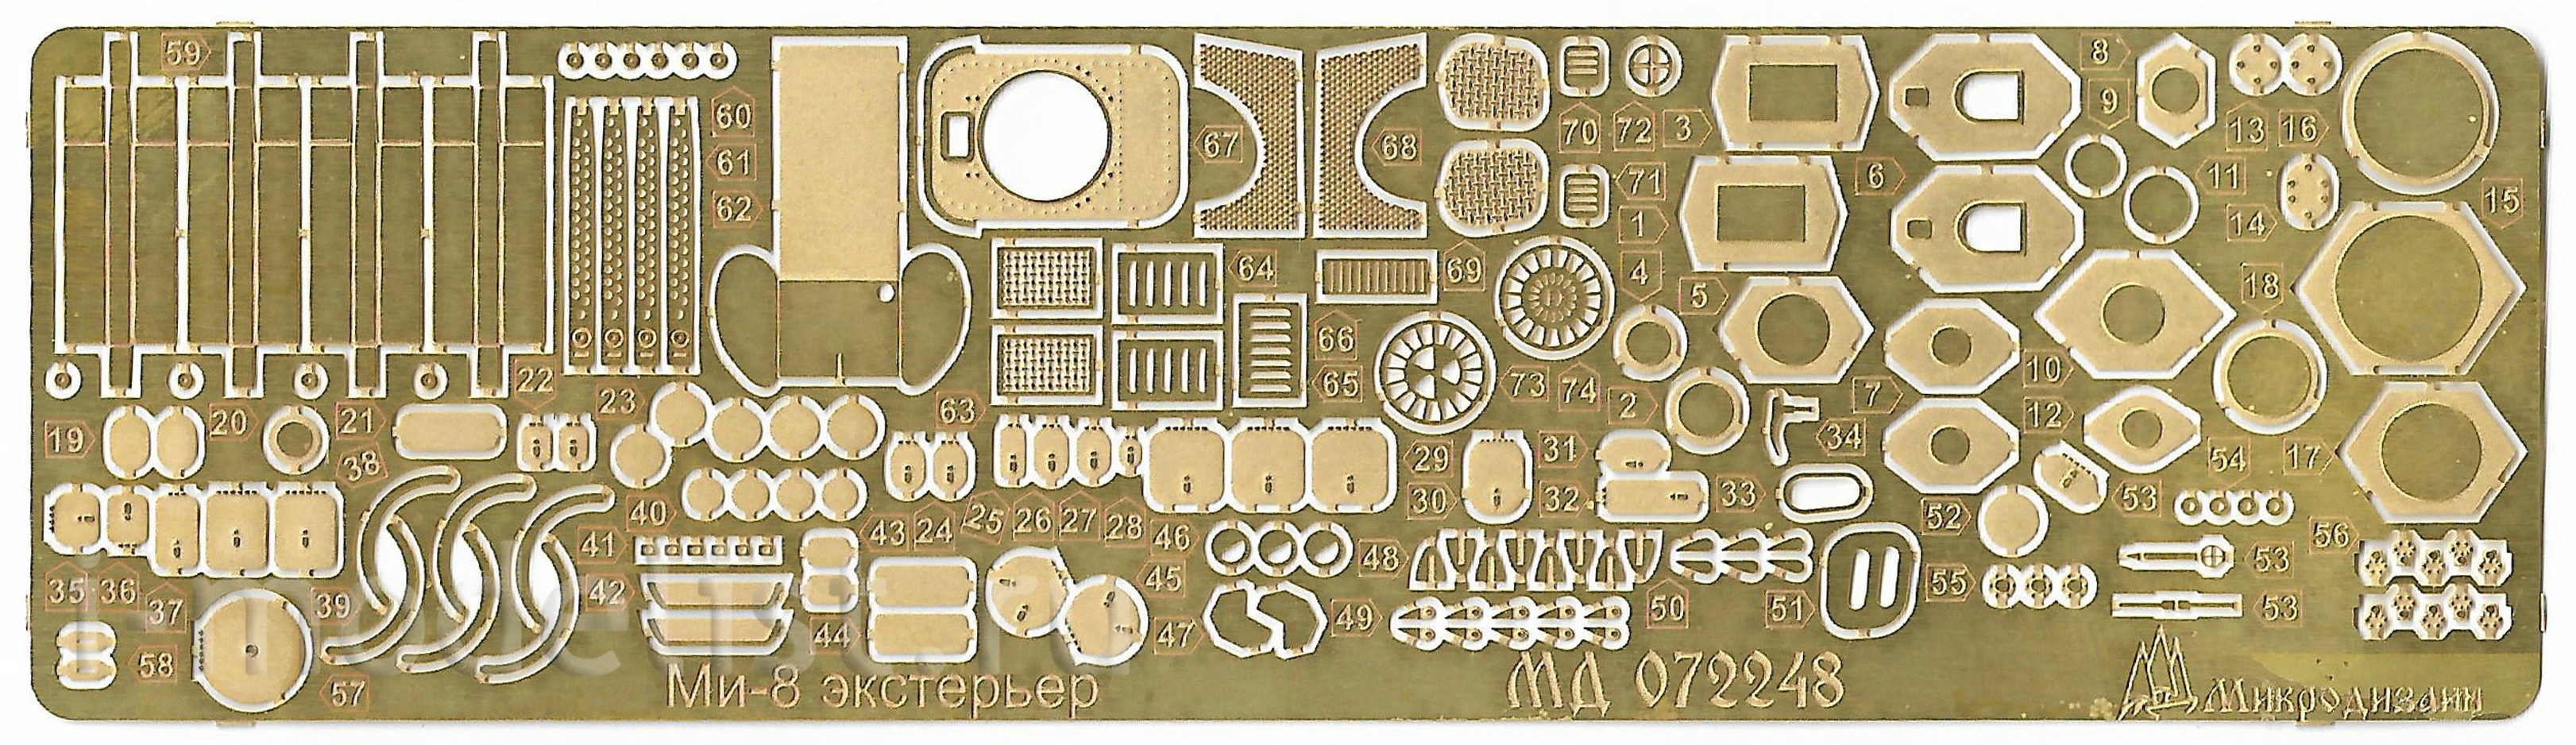 072248 Microdesign 1/72 photo etched parts exterior